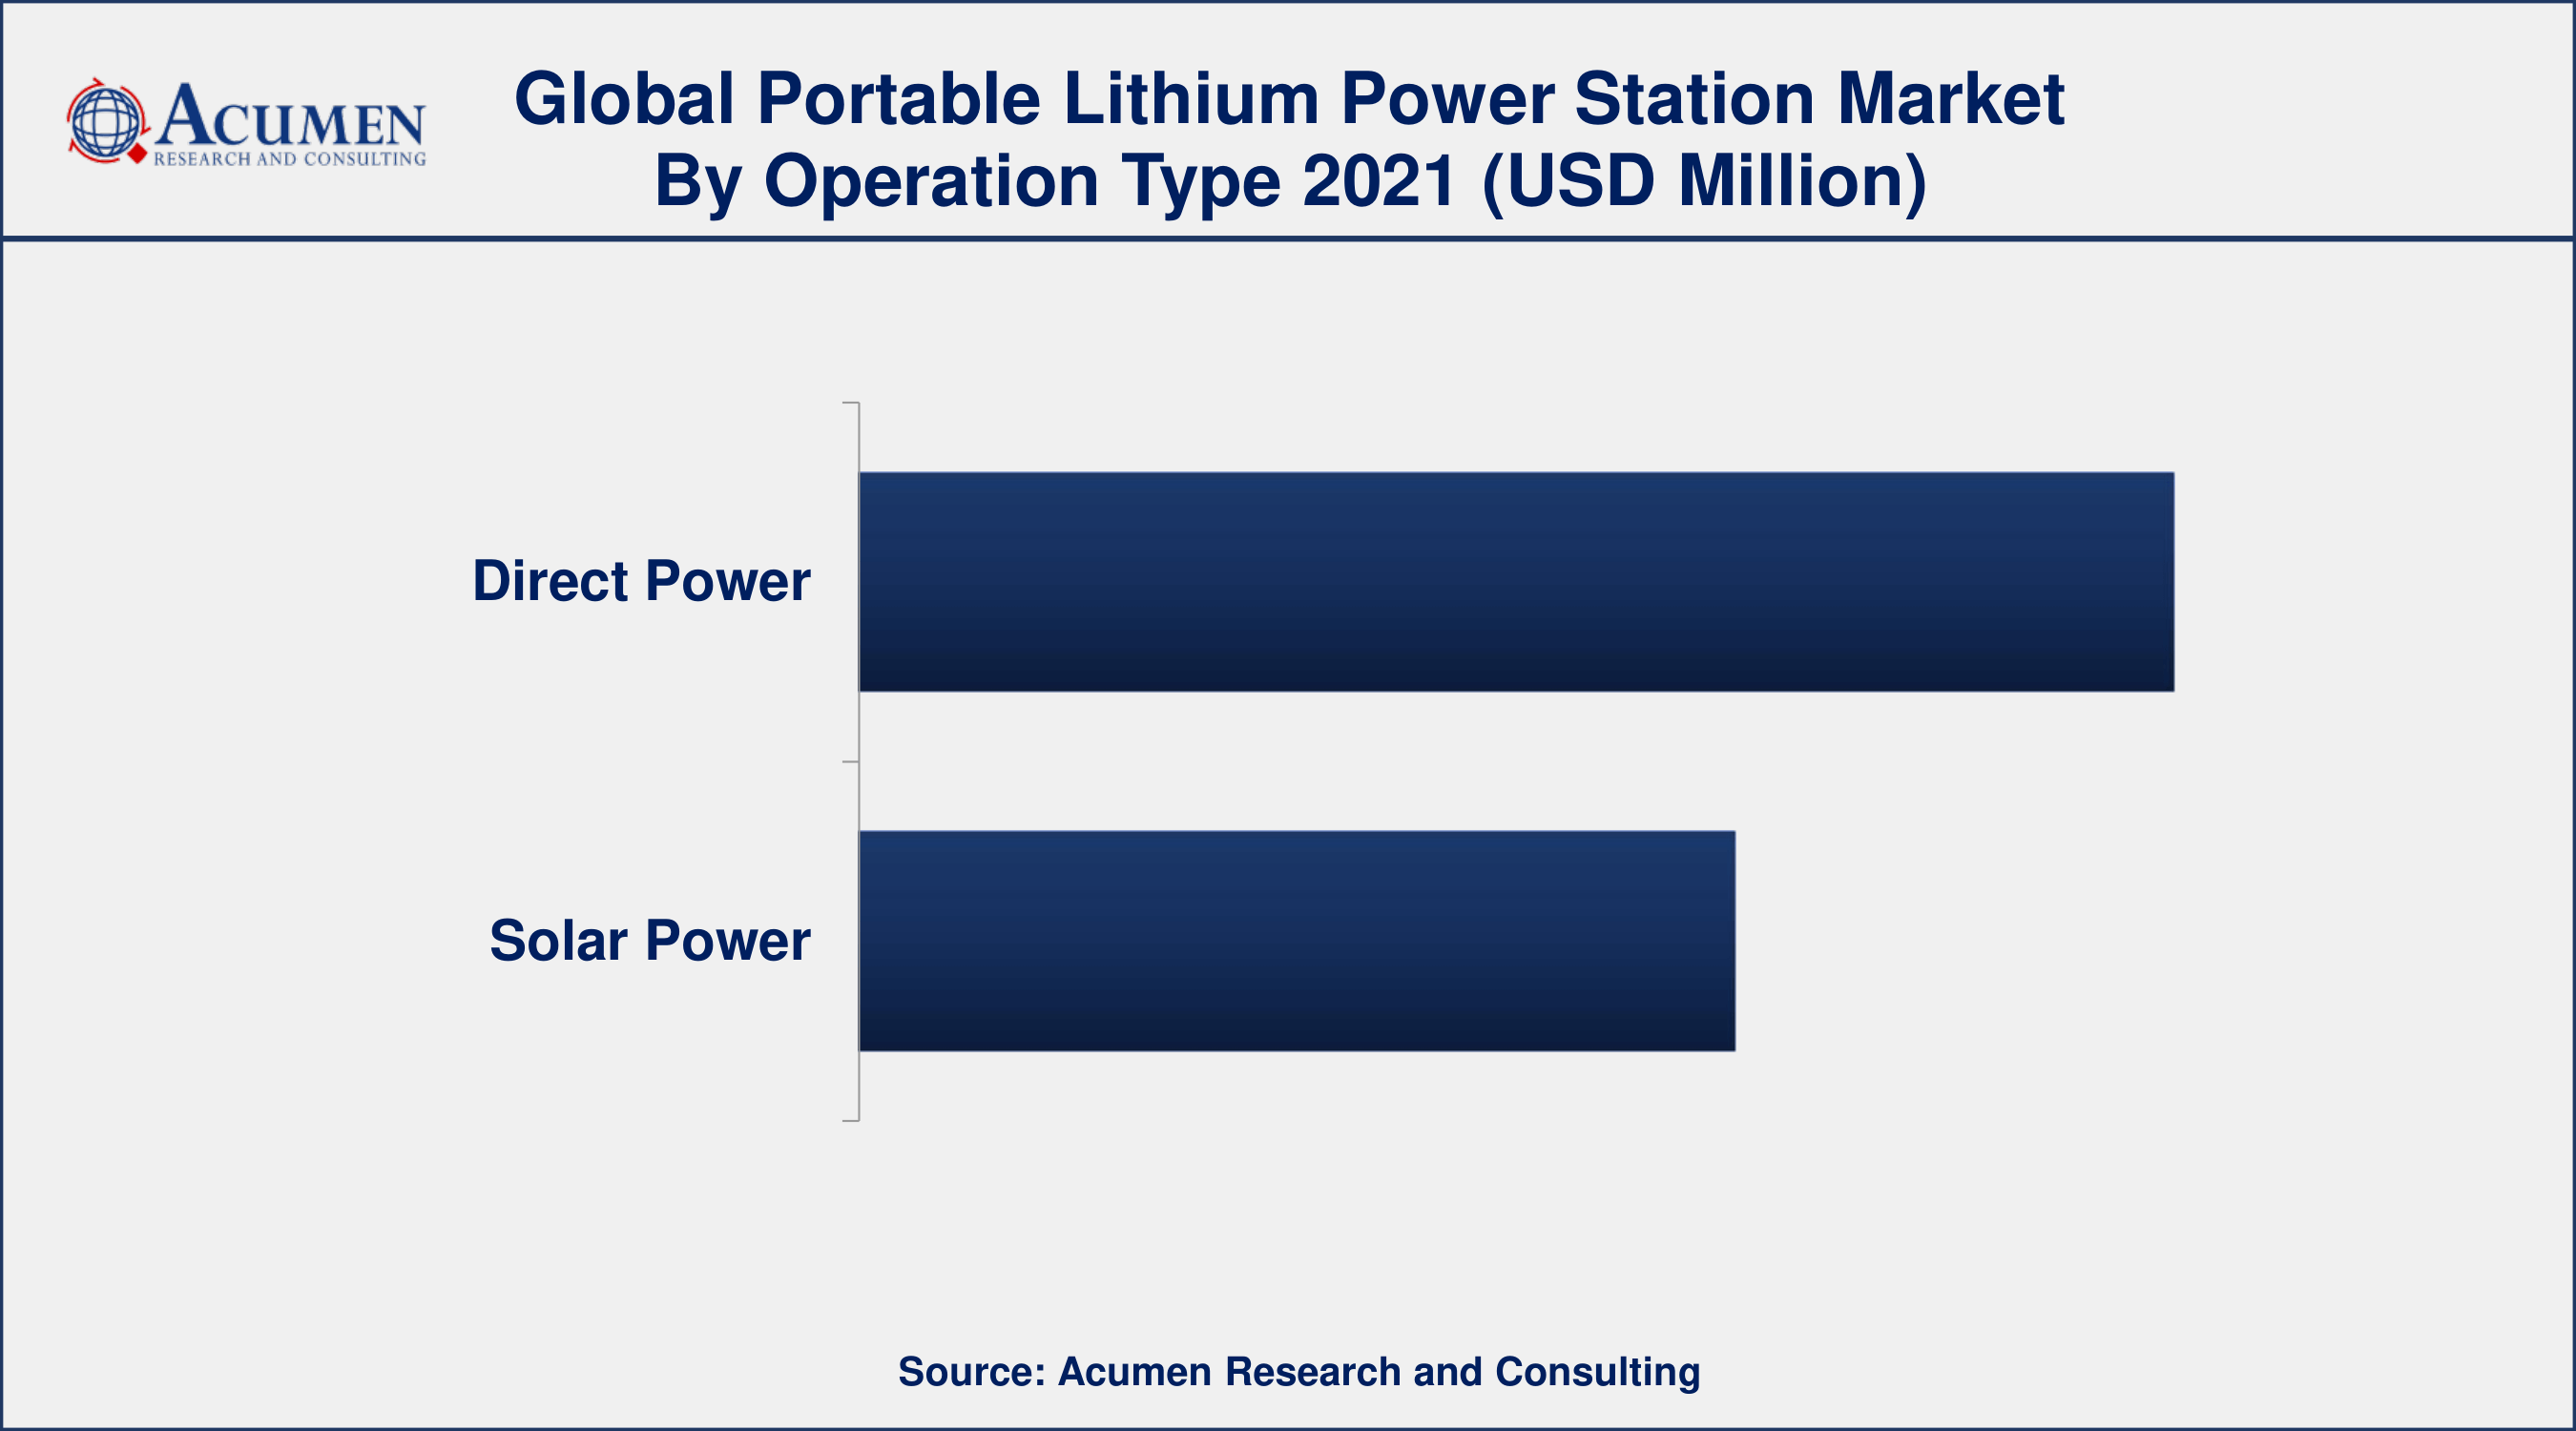 By operation type, direct power segment engaged more than 60% of the total market share in 2021